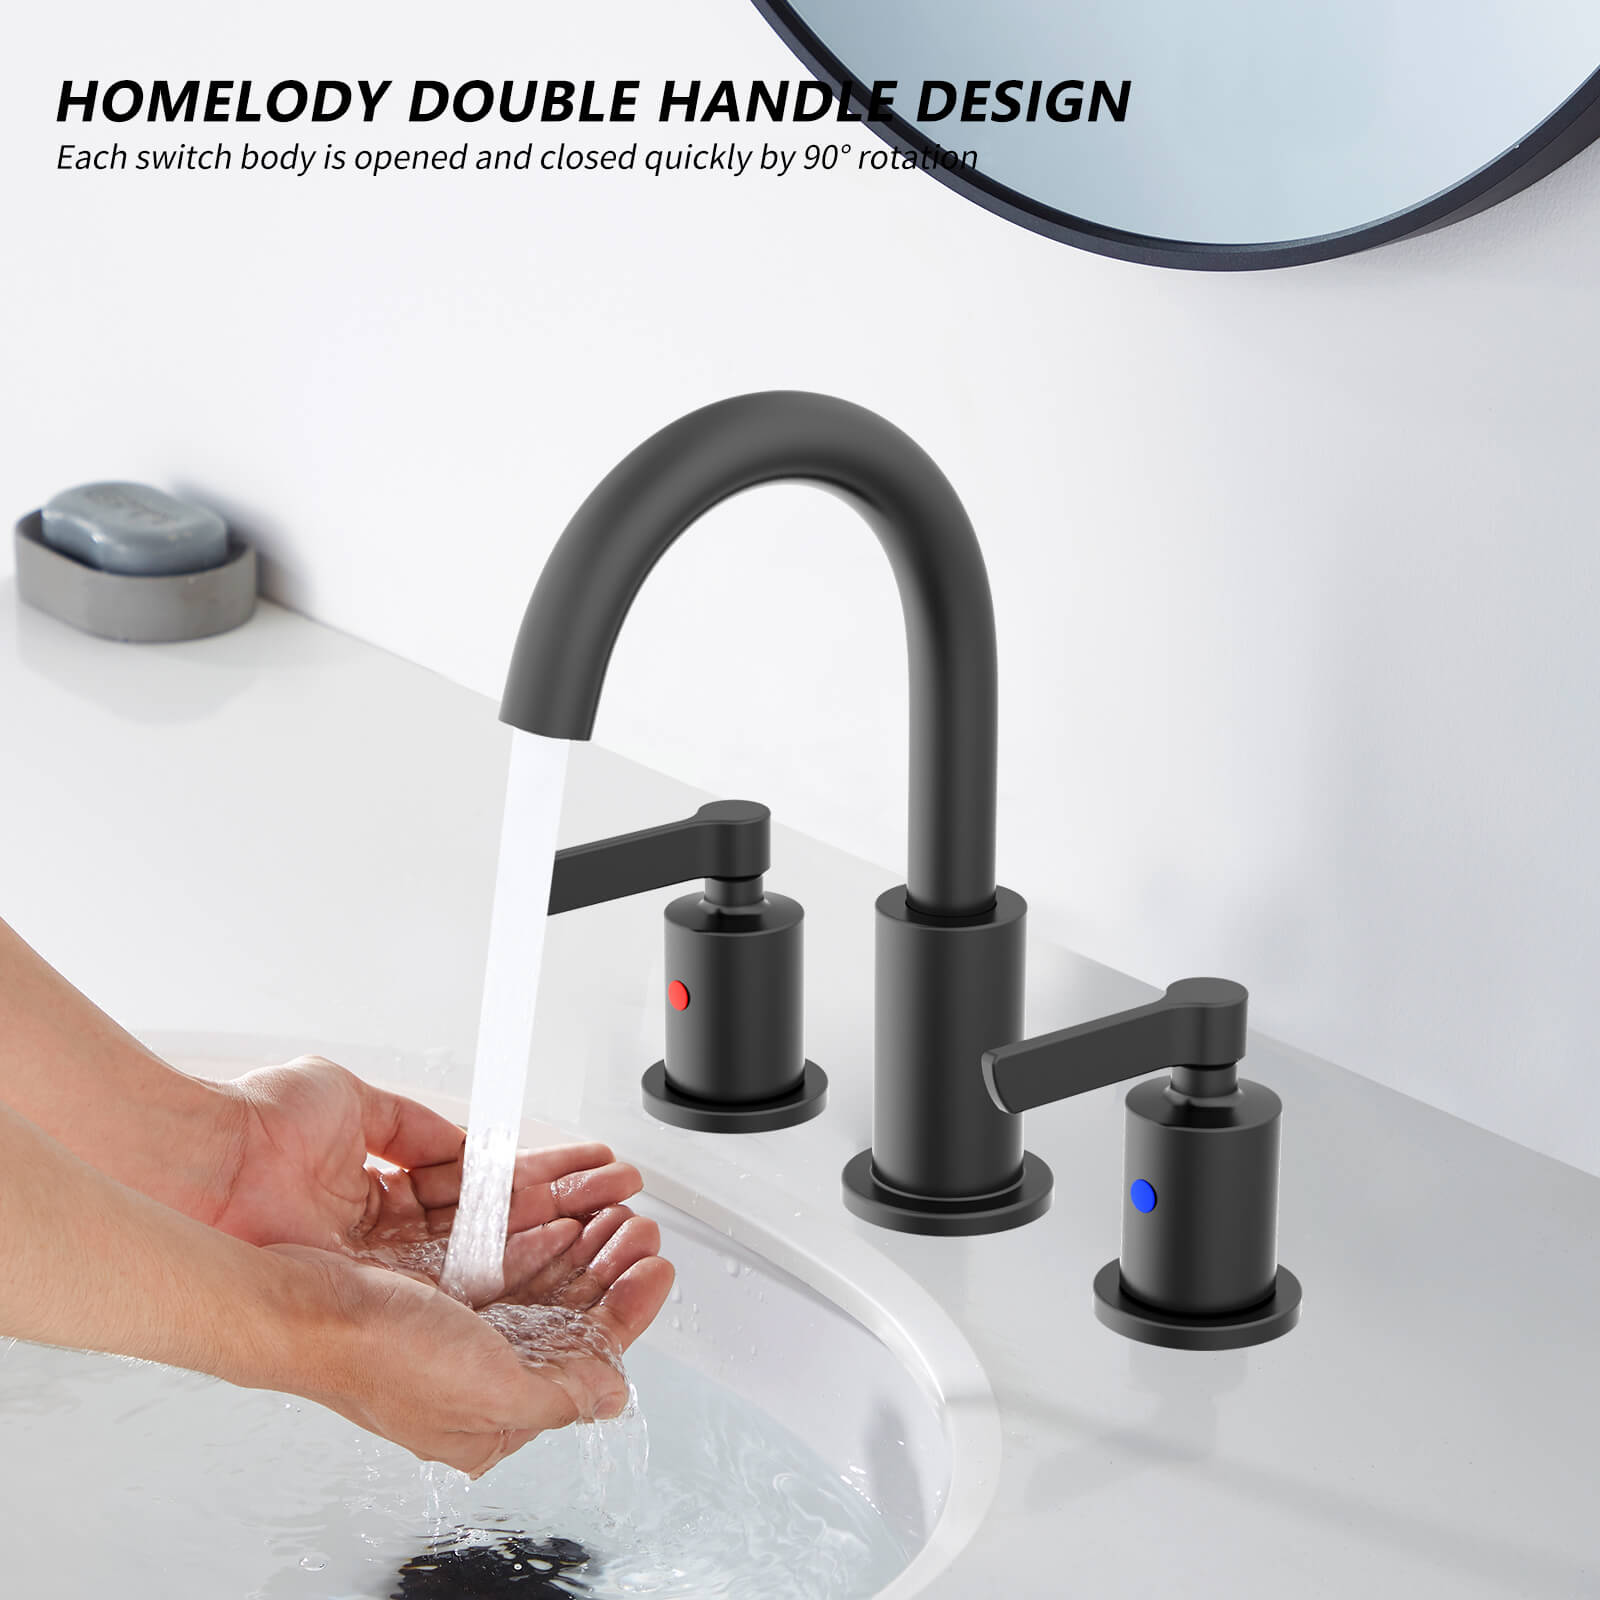 Homelody 3 Hole 8 Inch Widespread Faucet for Bathroom Sink with Pop-up Drain and Supply Lines